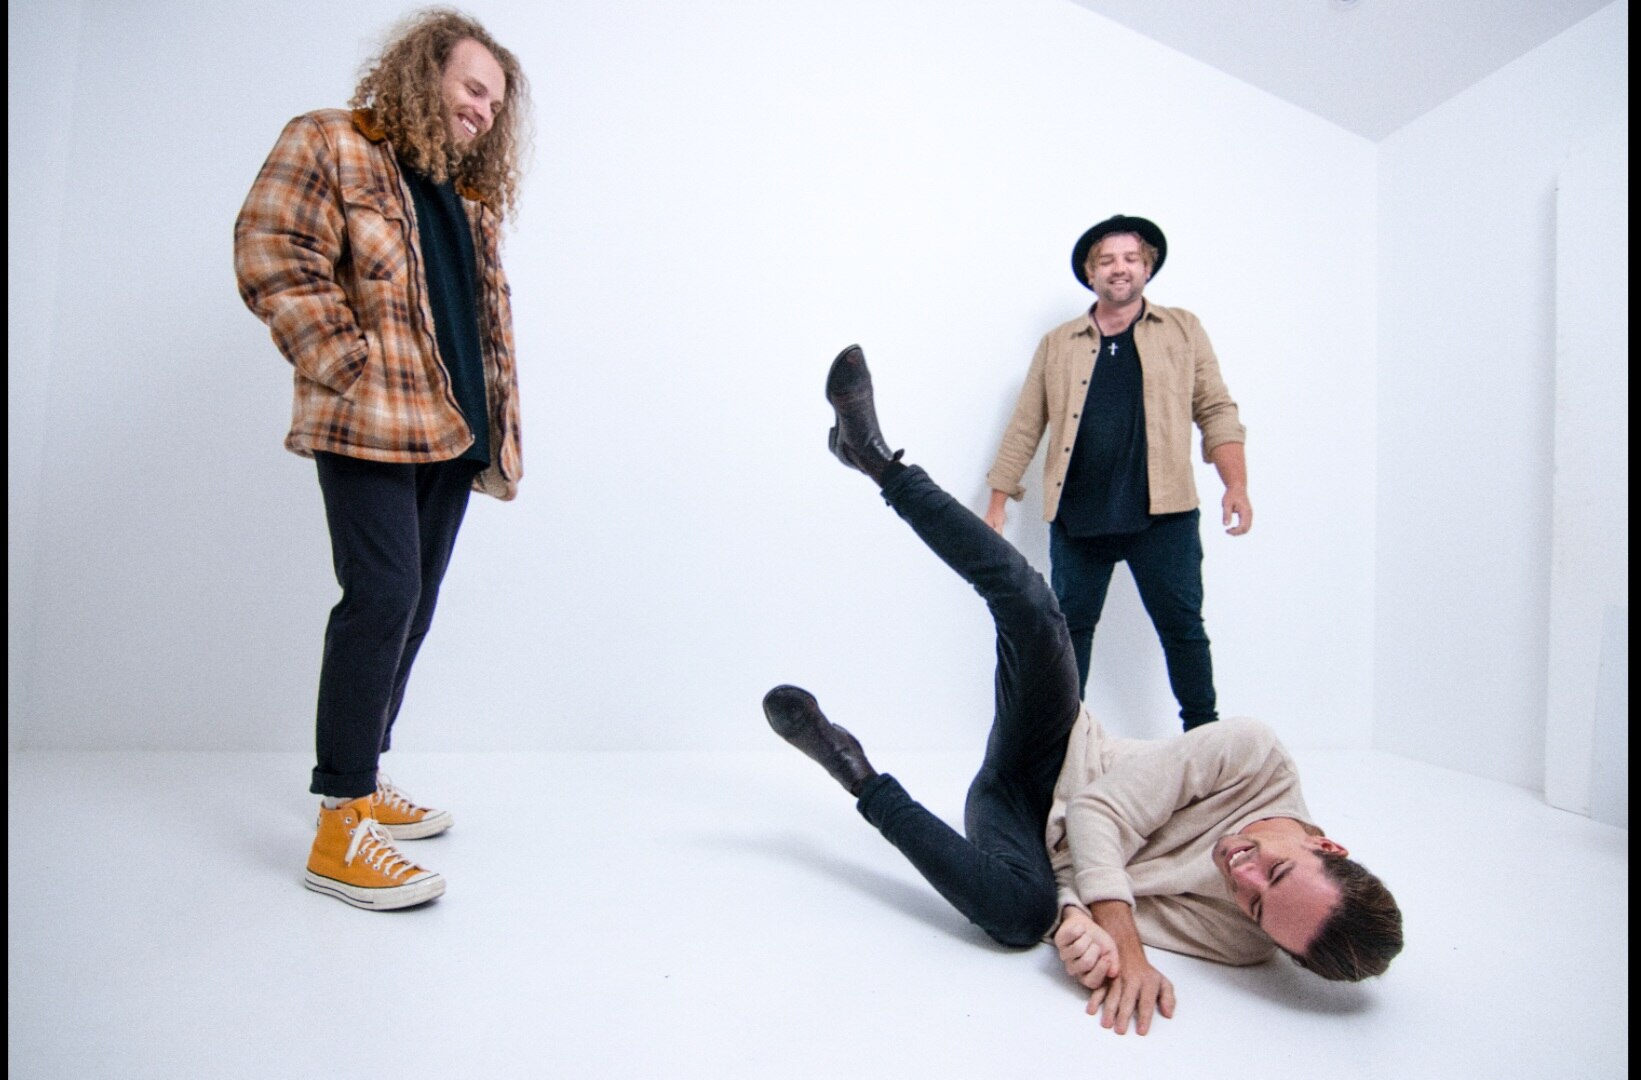 three band members laugh and joke around in front of a white studio background